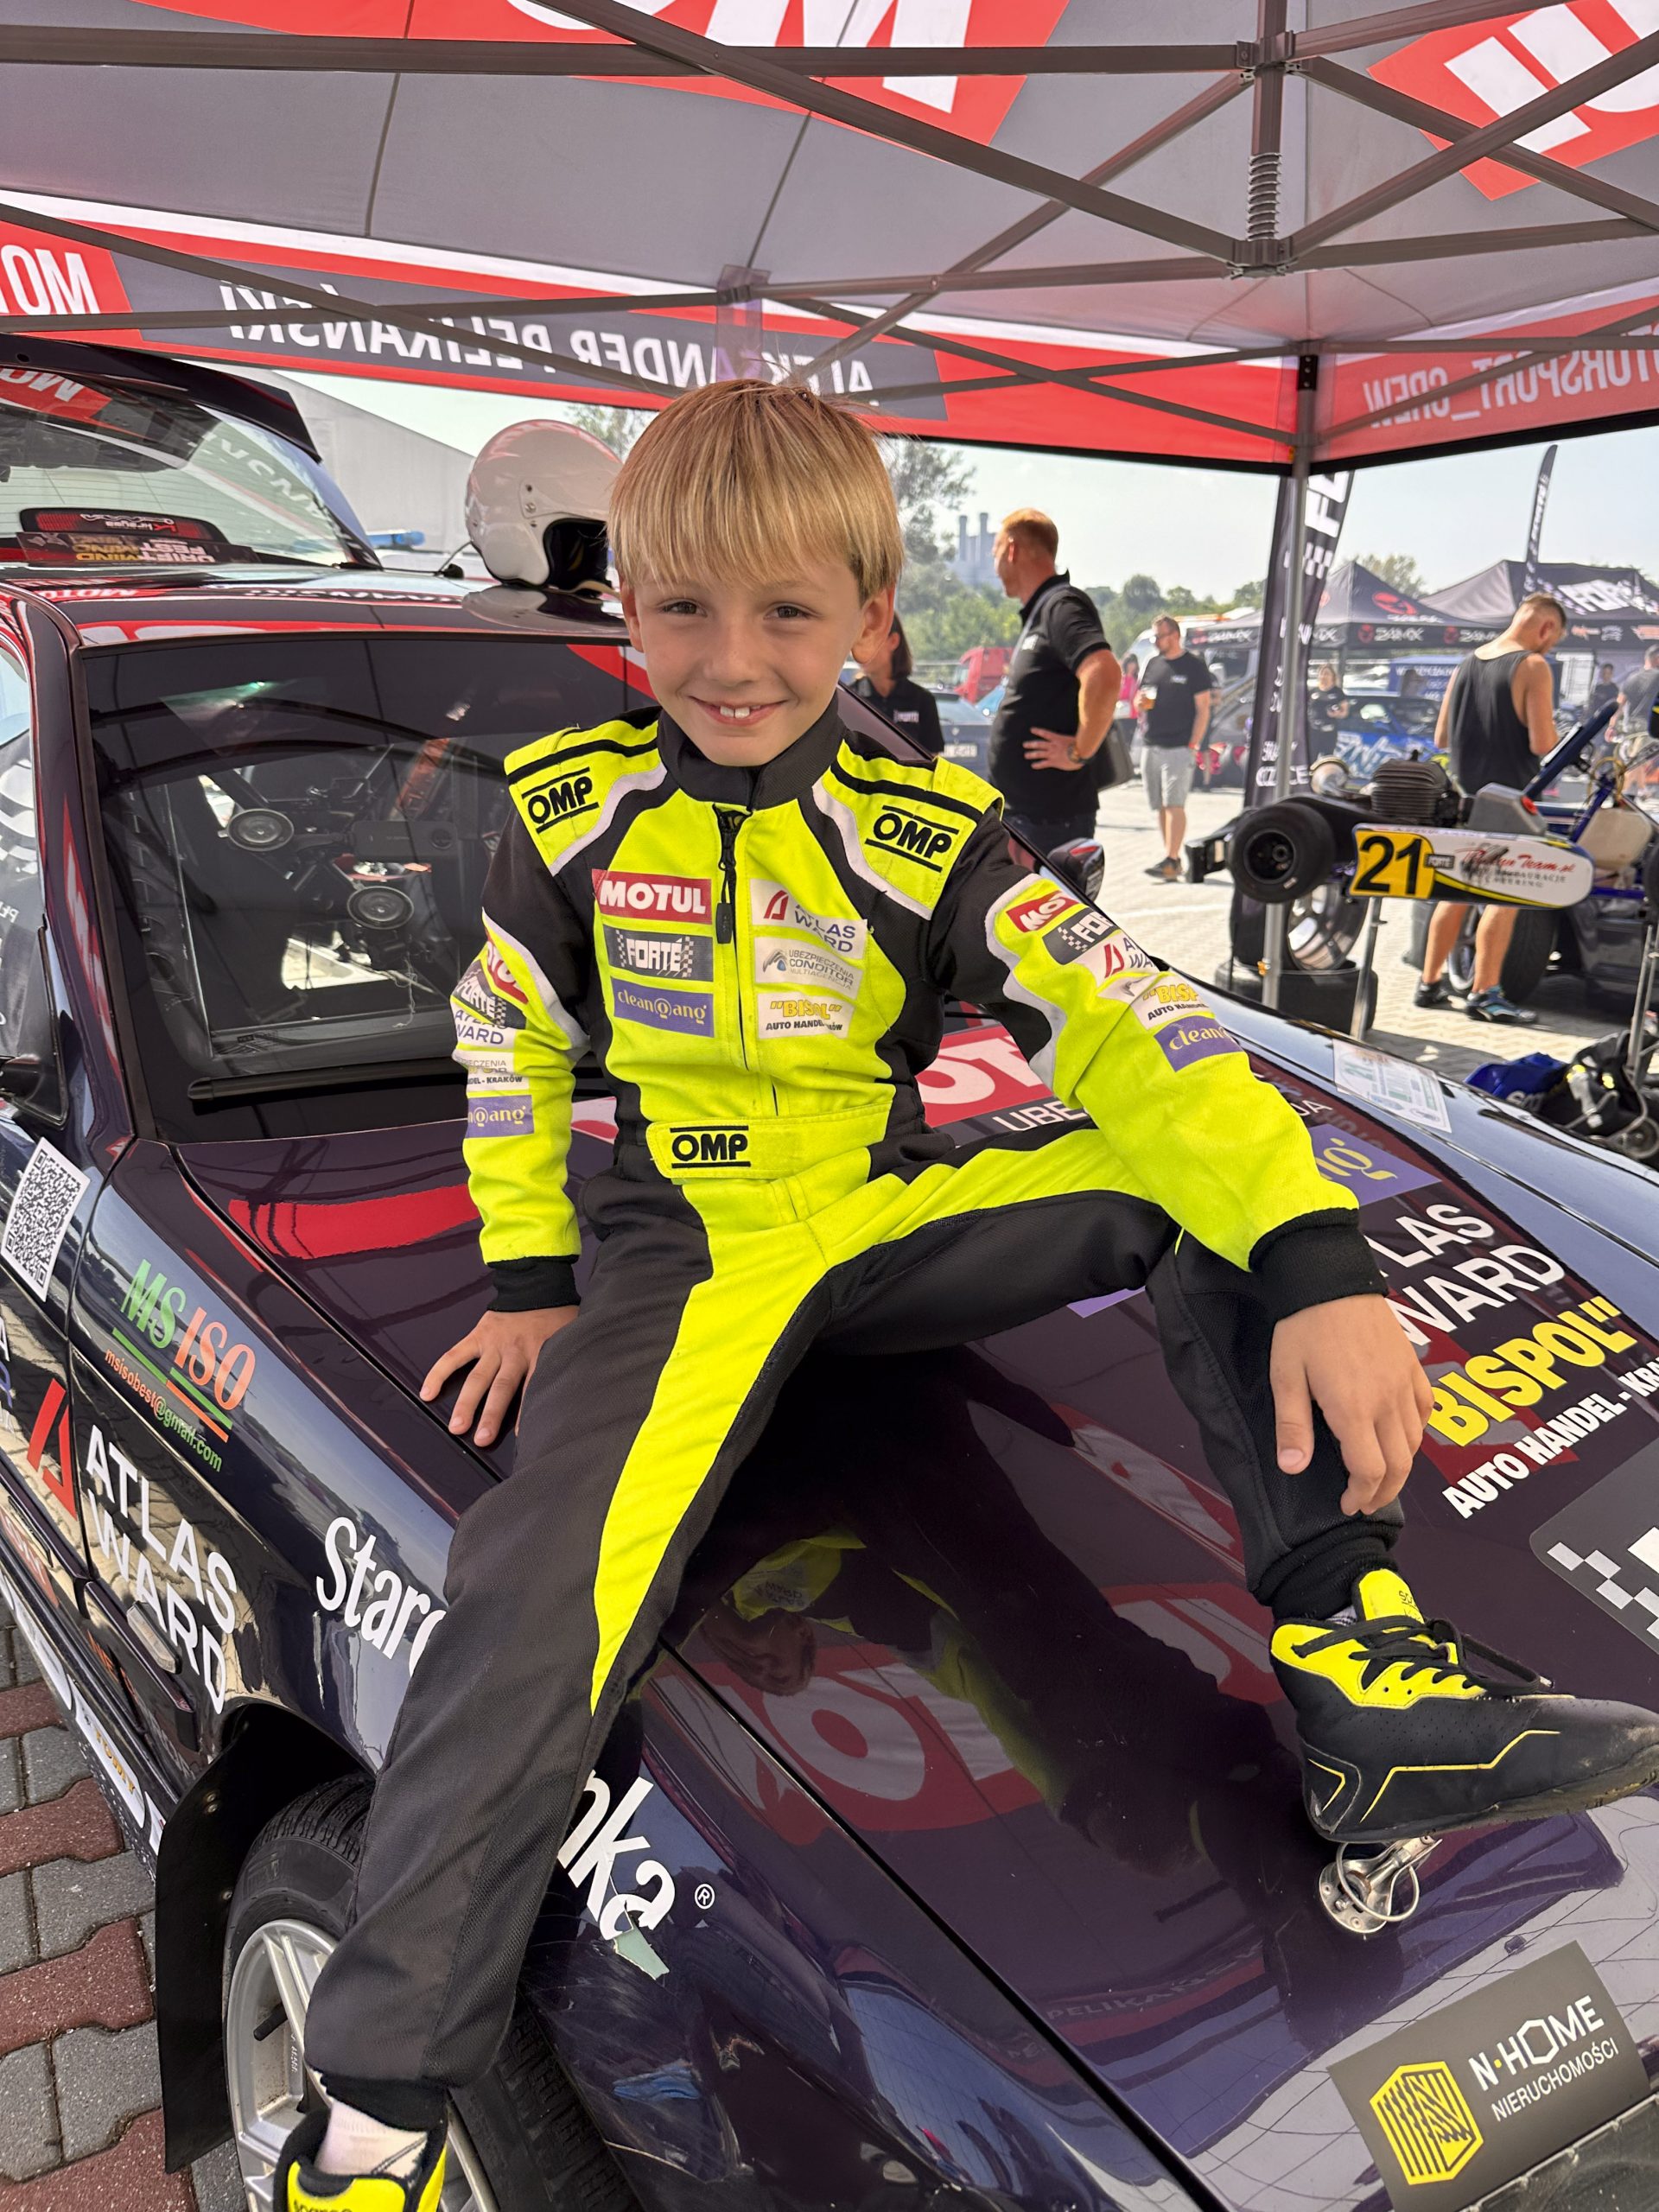 I got behind the wheel of a car at 7 years old – now I’m set to become one of the world’s youngest rally drivers